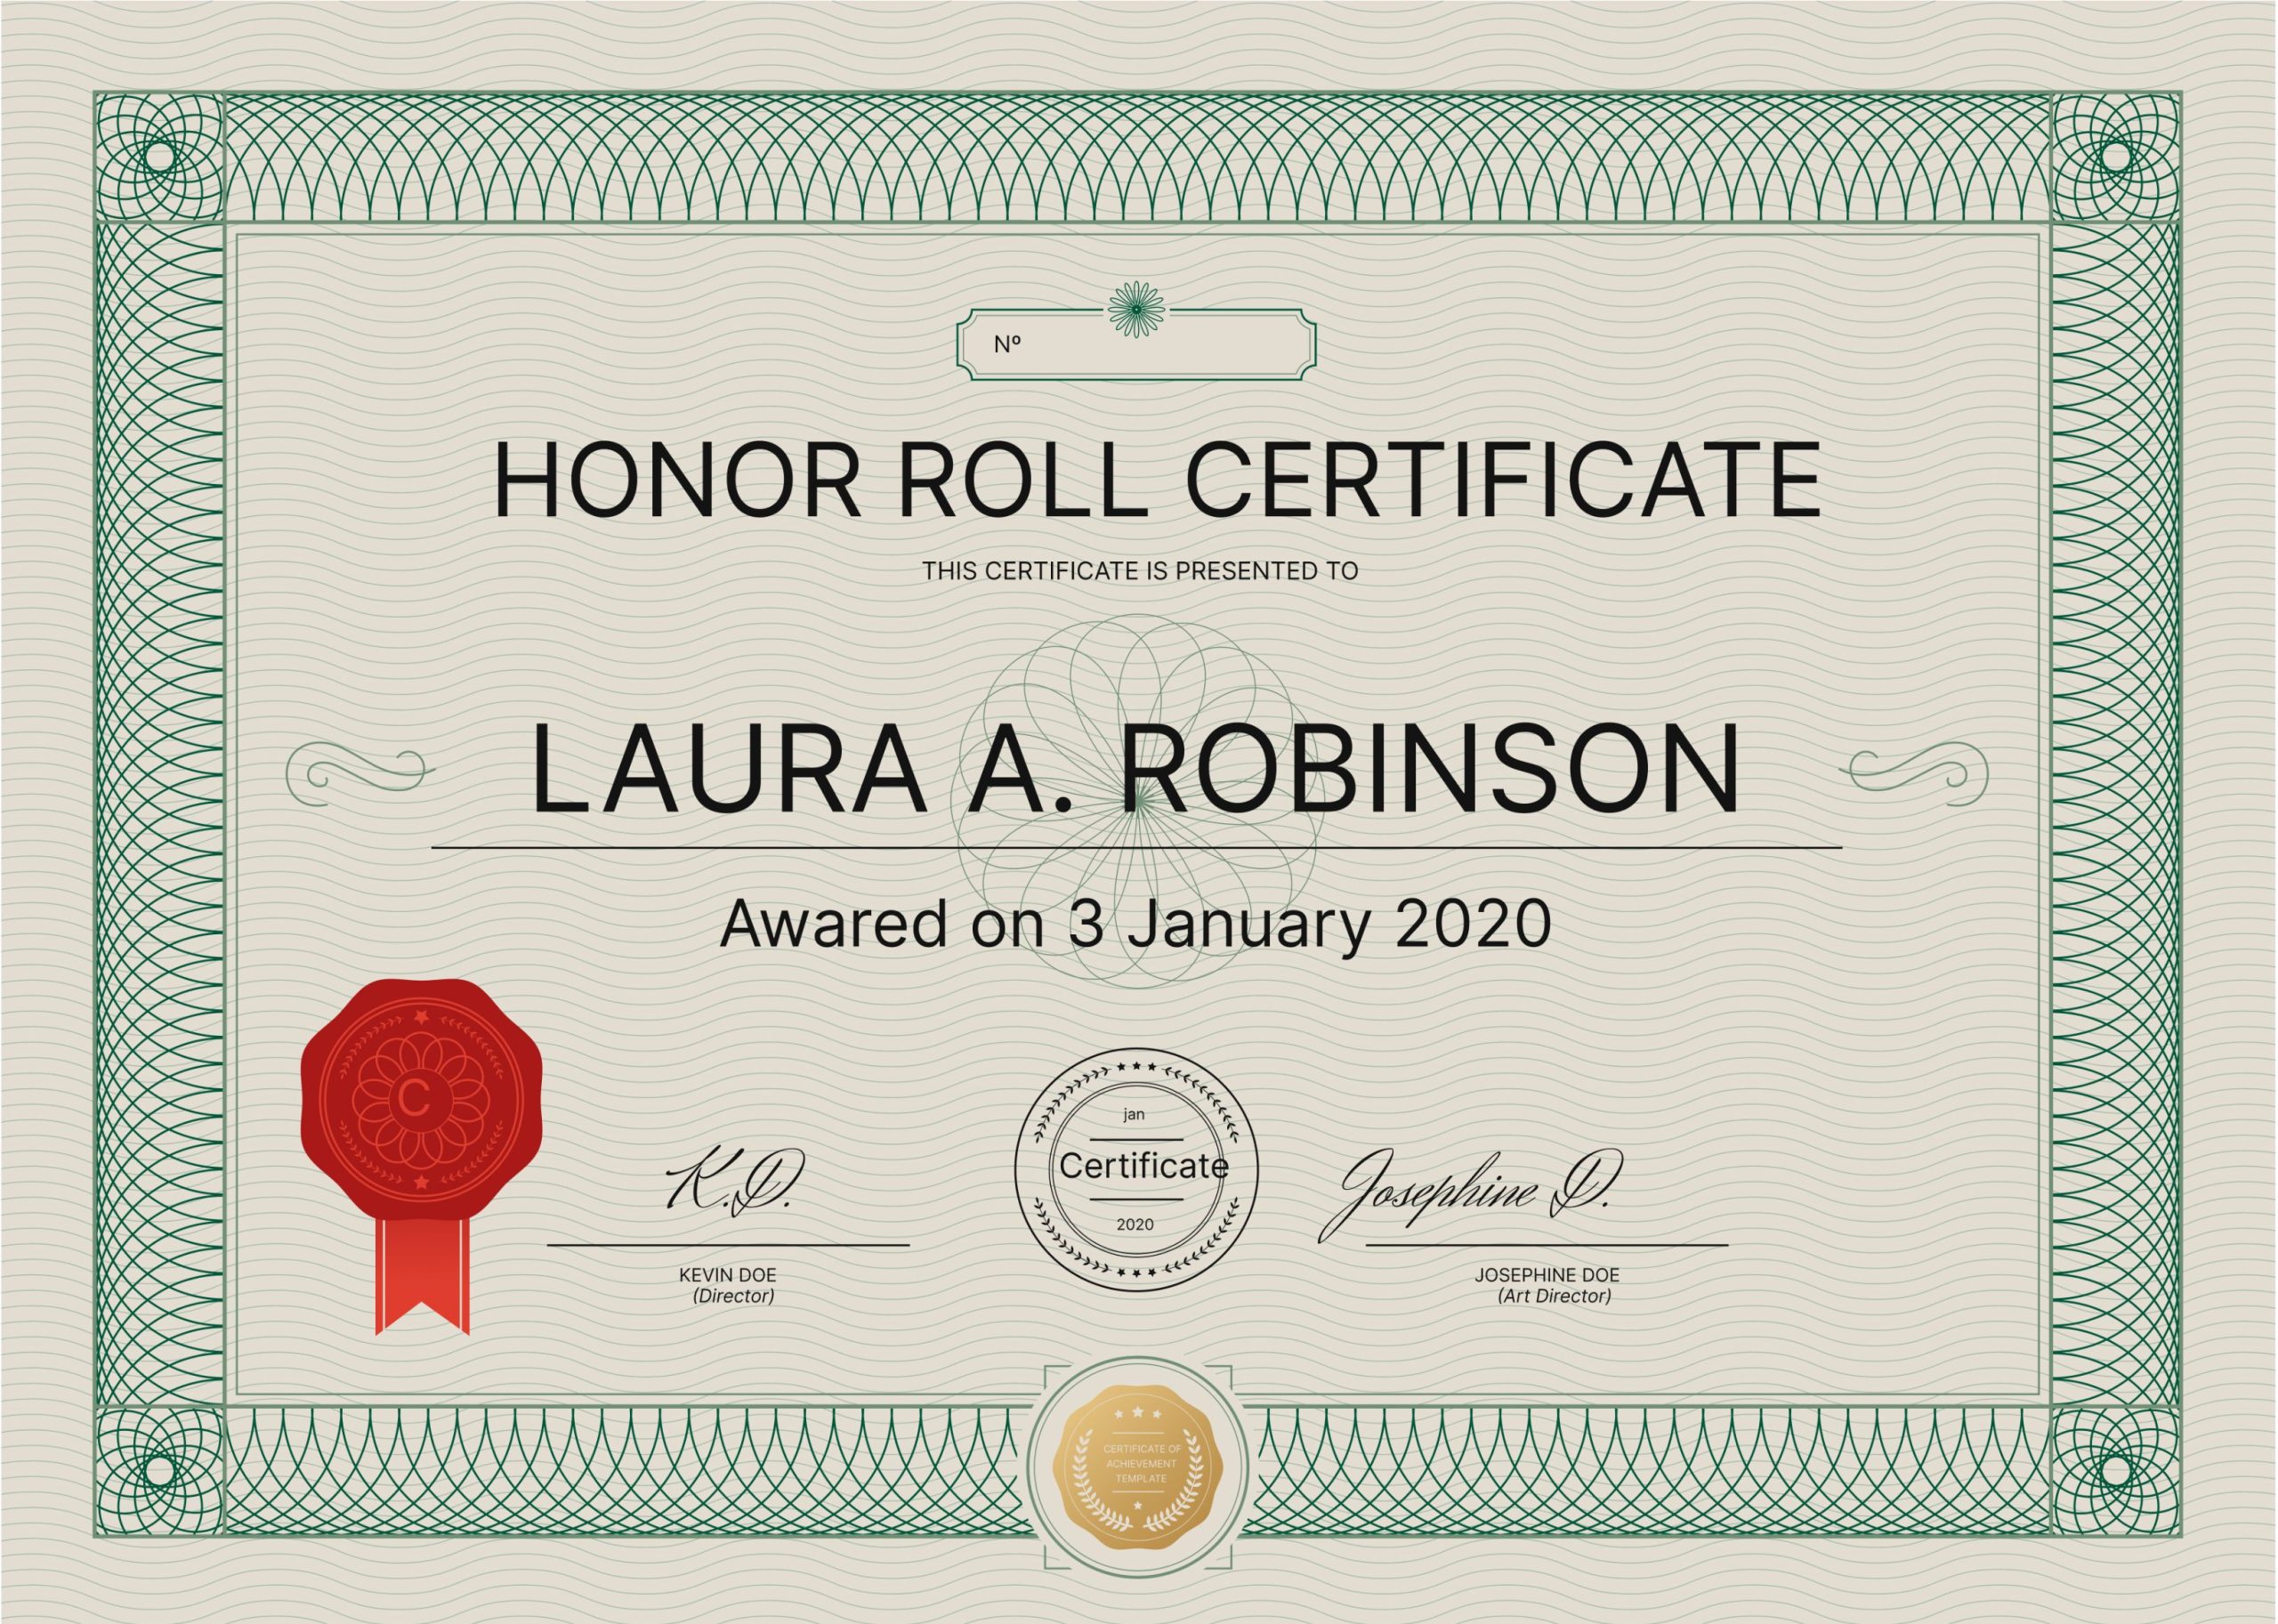 Green Traditional Honor Roll Certificate with Seal